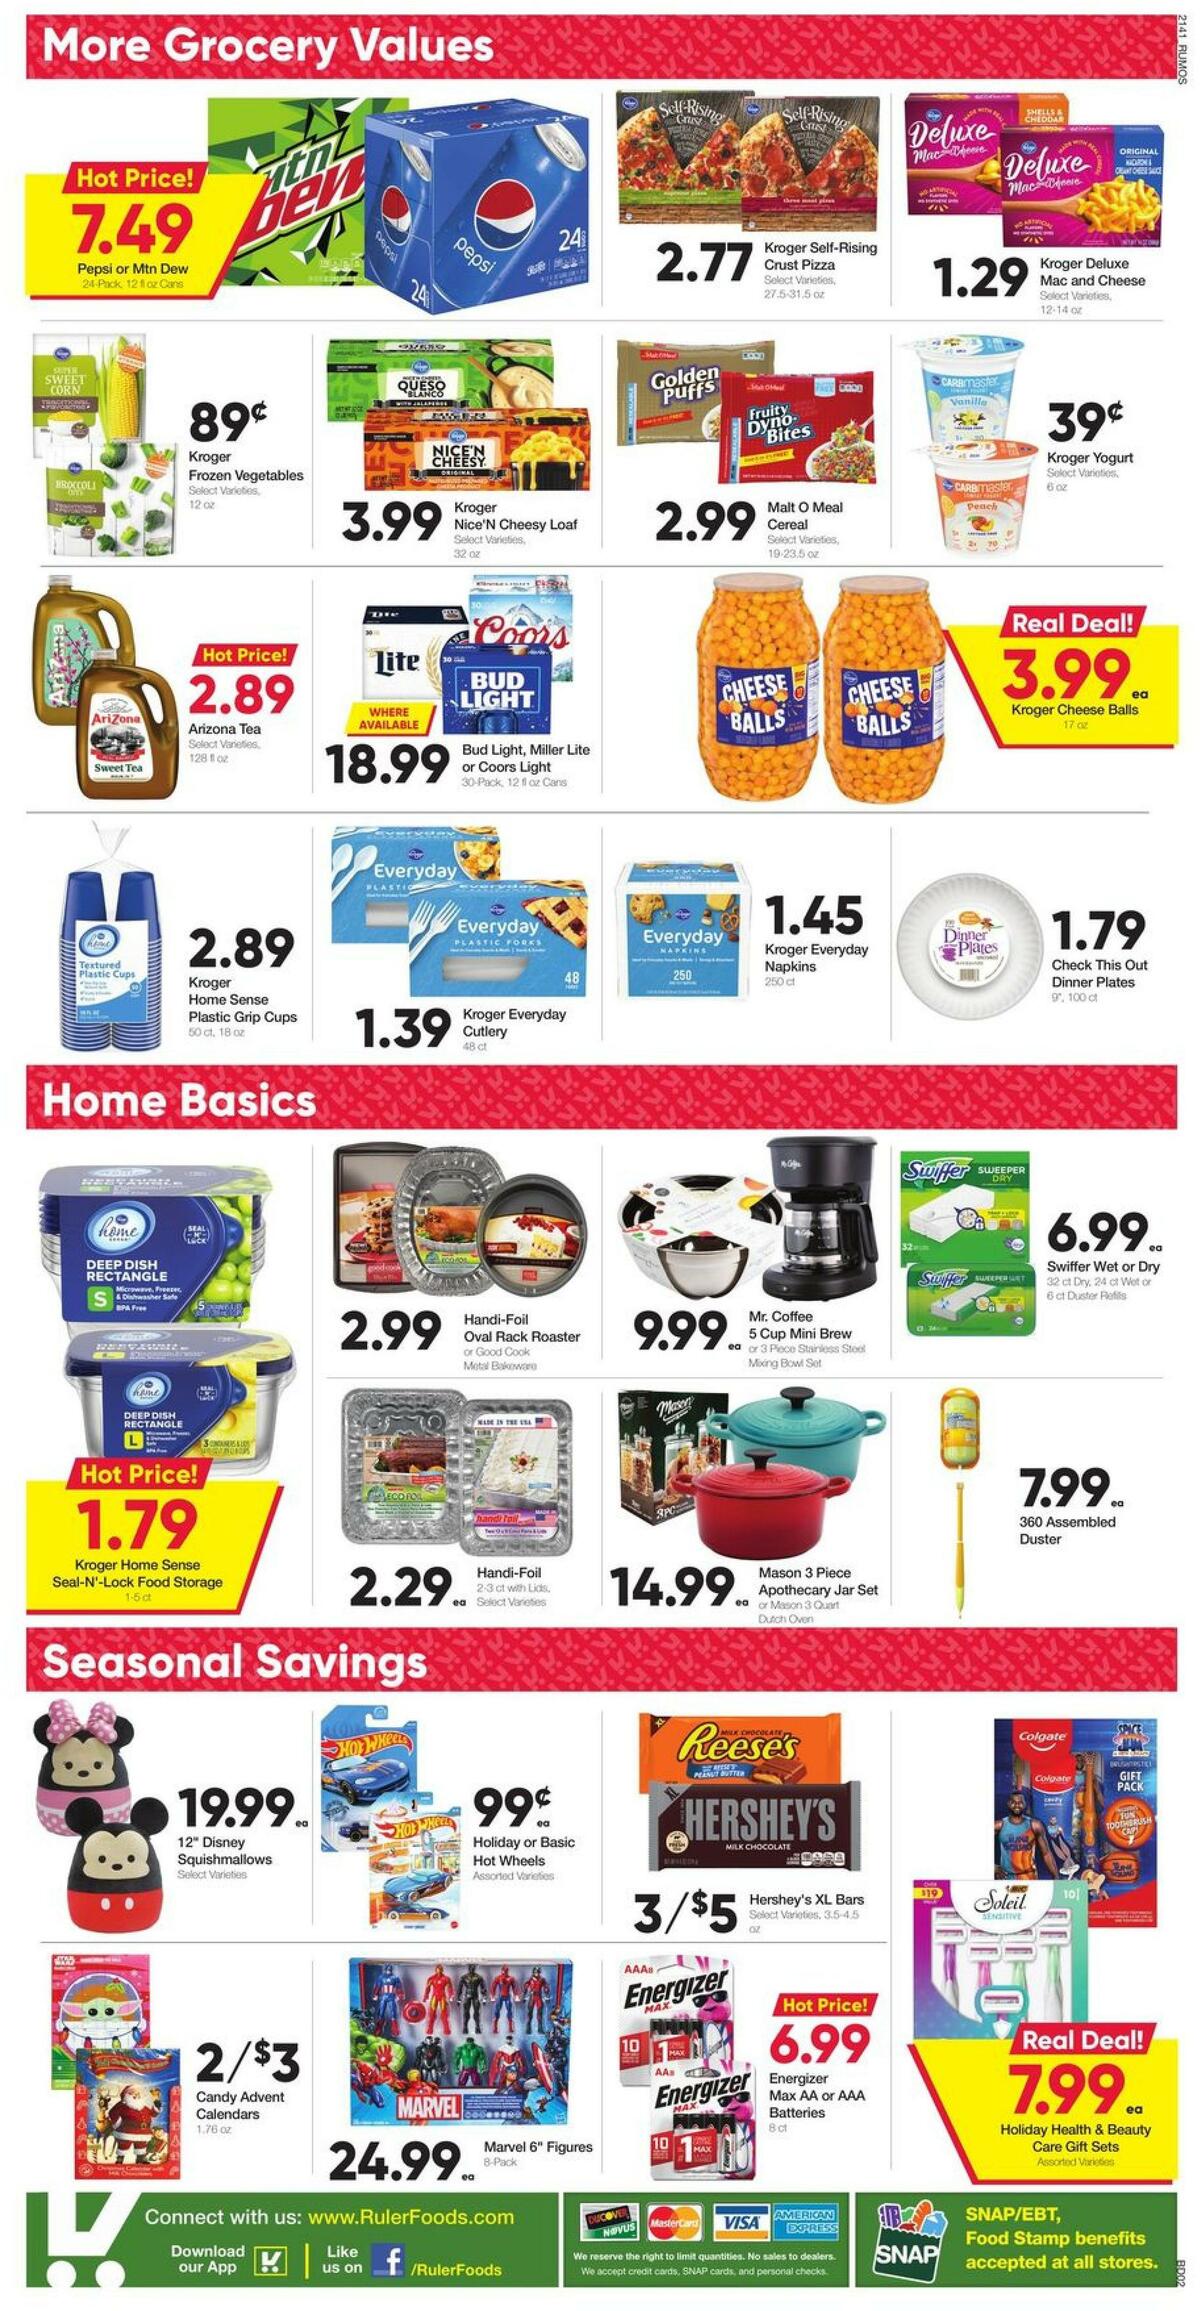 Ruler Foods Weekly Ad from November 10